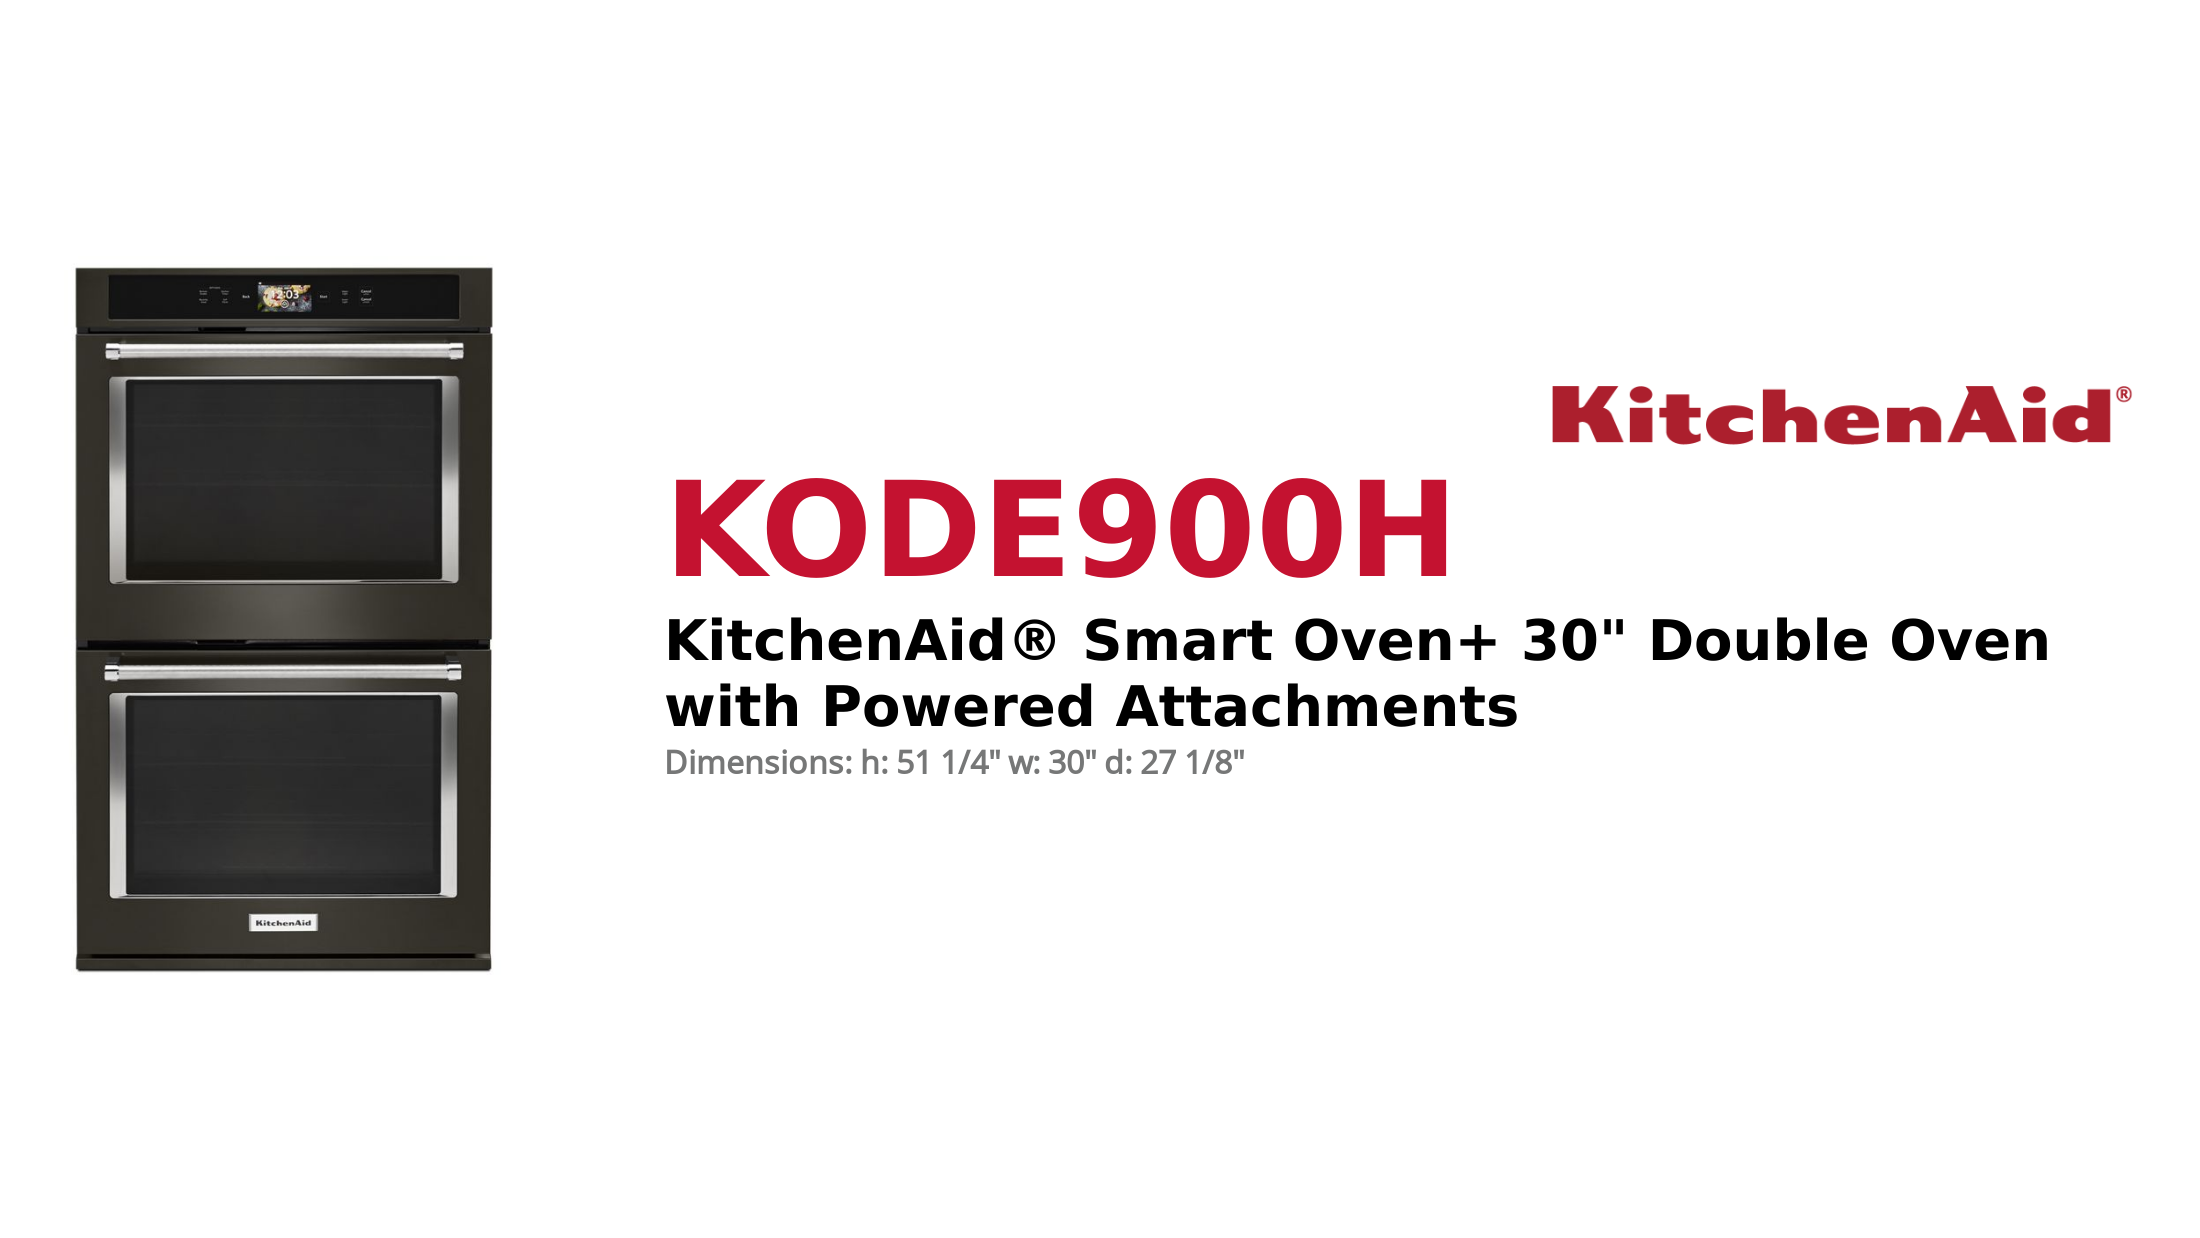 KODE900H Product Brief